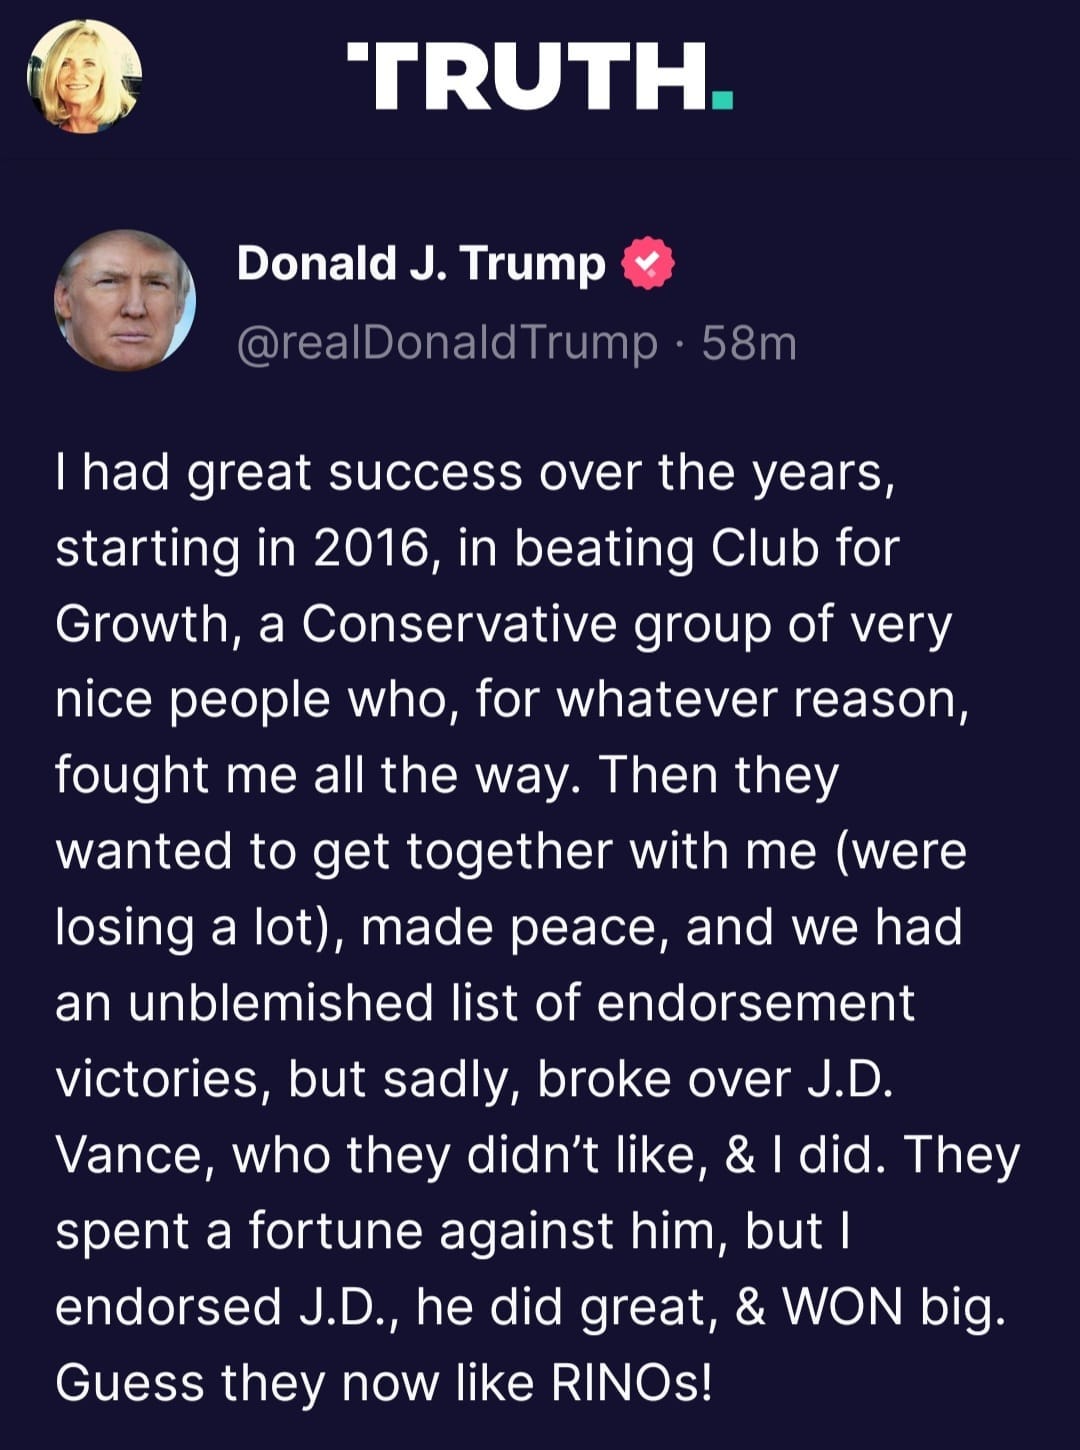 May be an image of 2 people and text that says 'TRUTH. Donald J. Trump @realDonaldTrump 58m I had great success over the years, starting in 2016, in beating Club for Growth, a Conservative group of very nice people who, for whatever reason, fought me all the way. Then they wanted to get together with me (were losing a lot), made peace, and we had an unblemished list of endorsement victories, but sadly, broke over J.D. Vance, who they didn't like & did. They spent a fortune against him, but| endorsed J.D., he did great, & WON big. Guess they now like RINOs!'